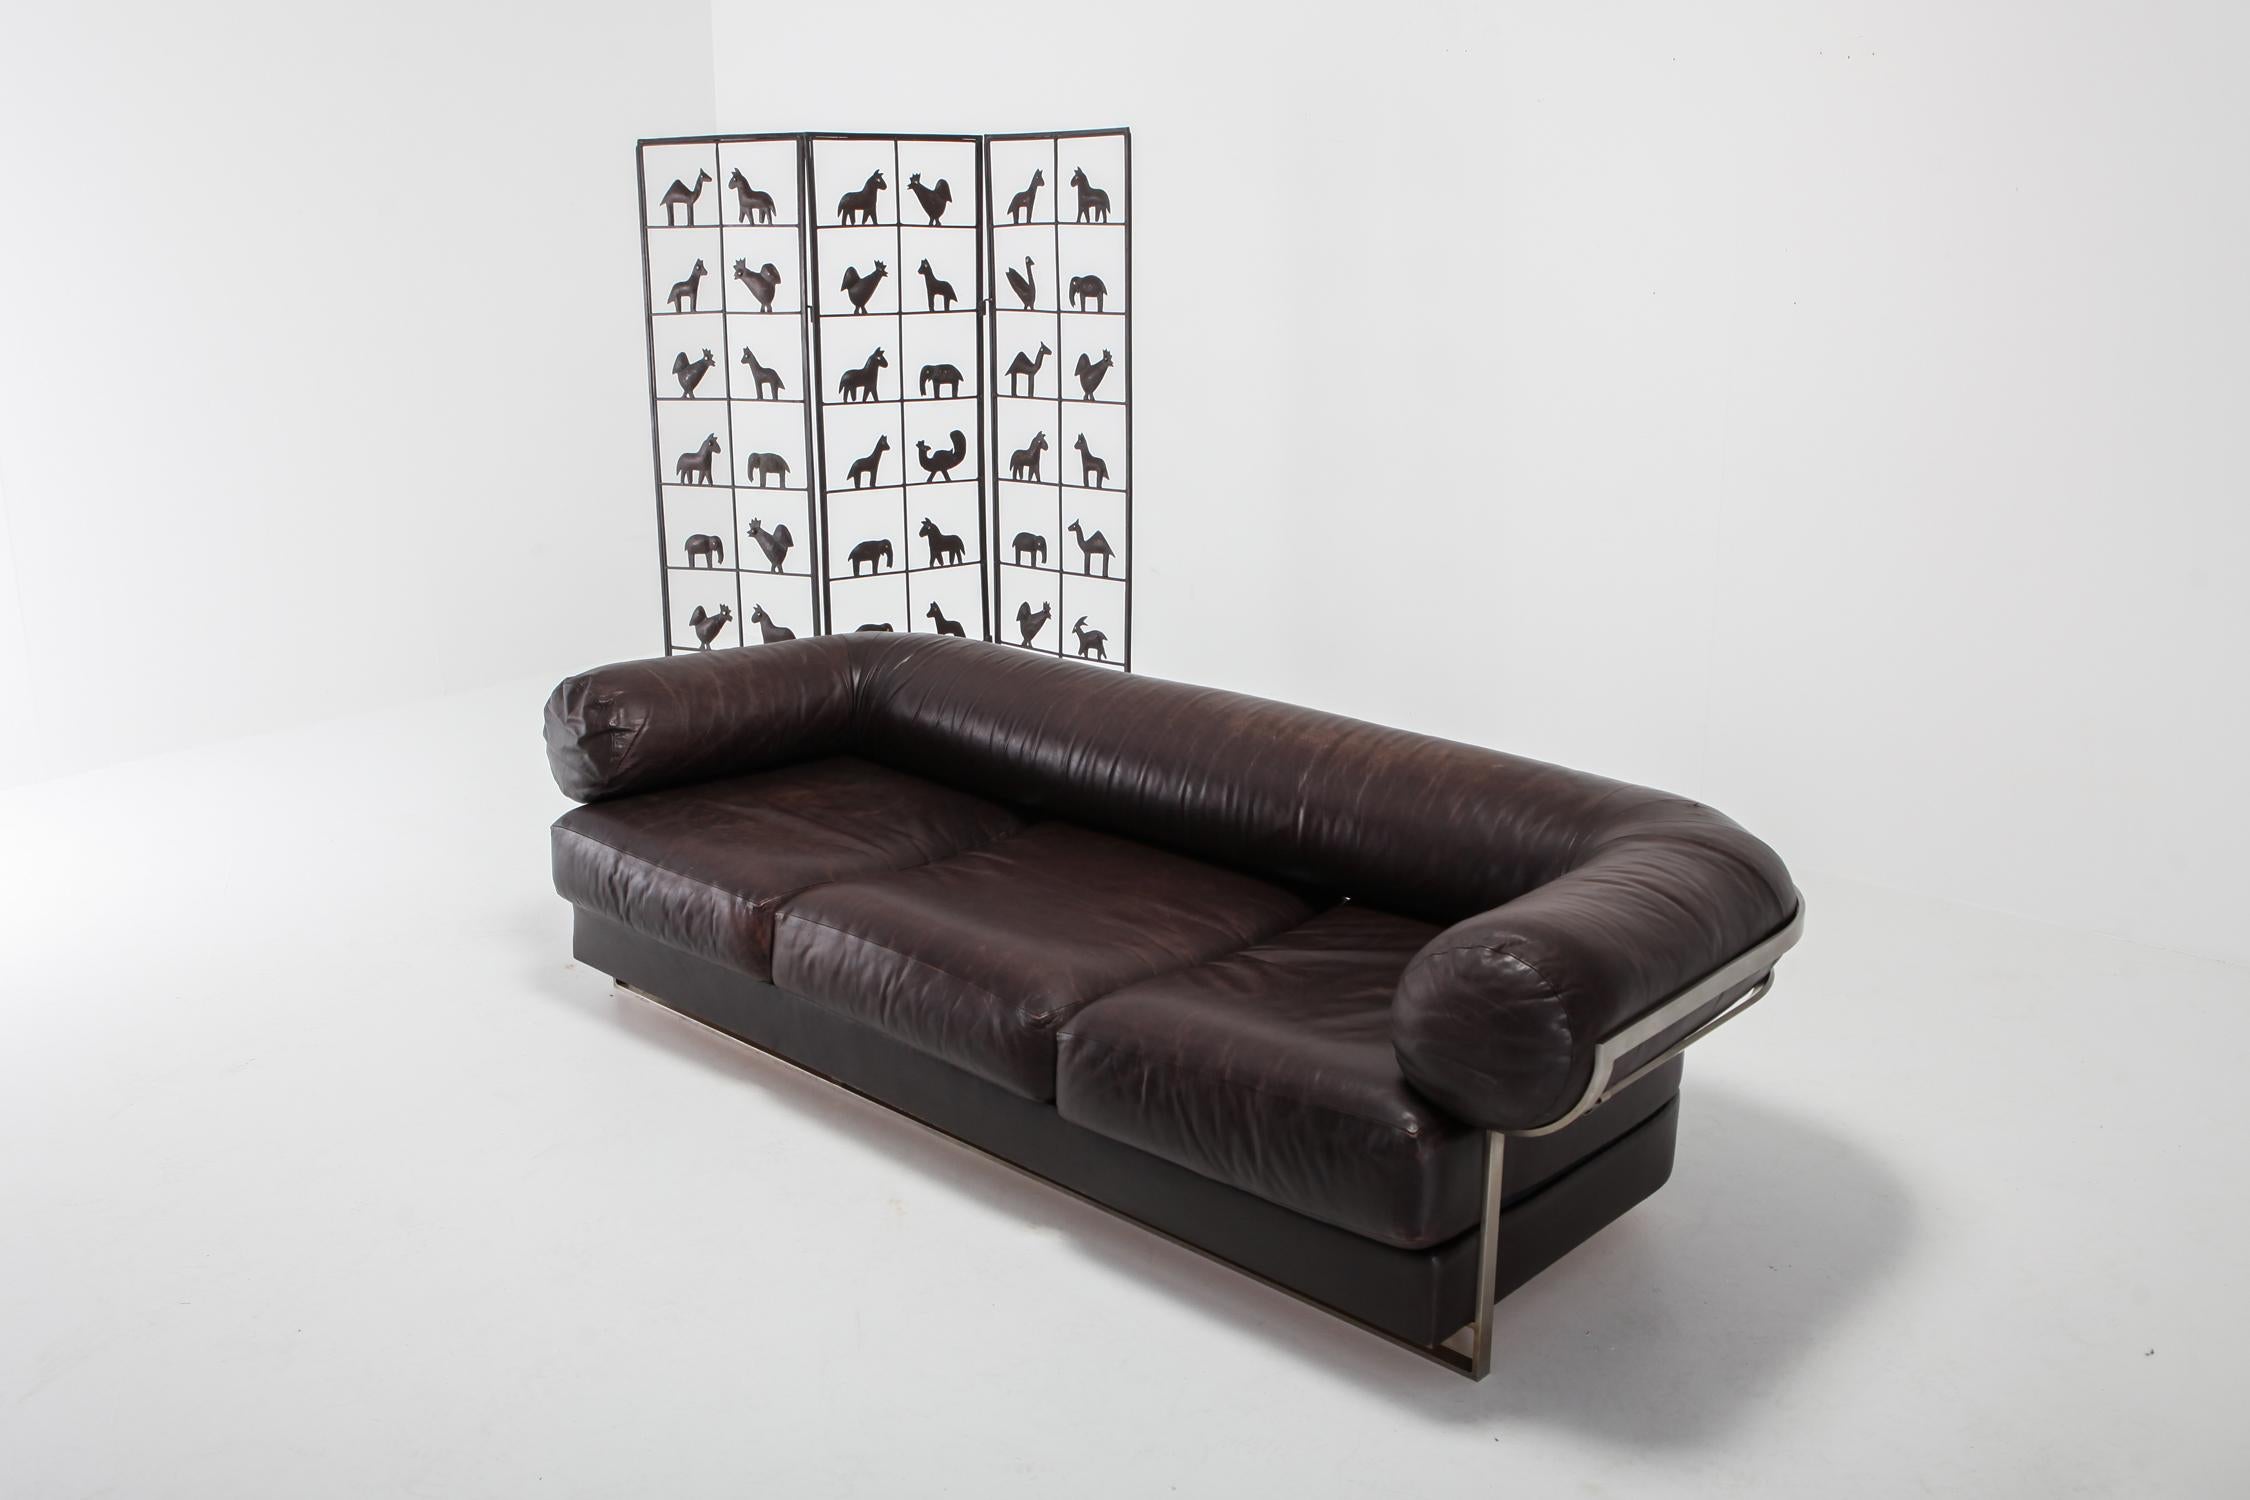 20th Century Charpentier Brown Leather 'Apollo' Sofa in Stainless Steel Frame For Sale